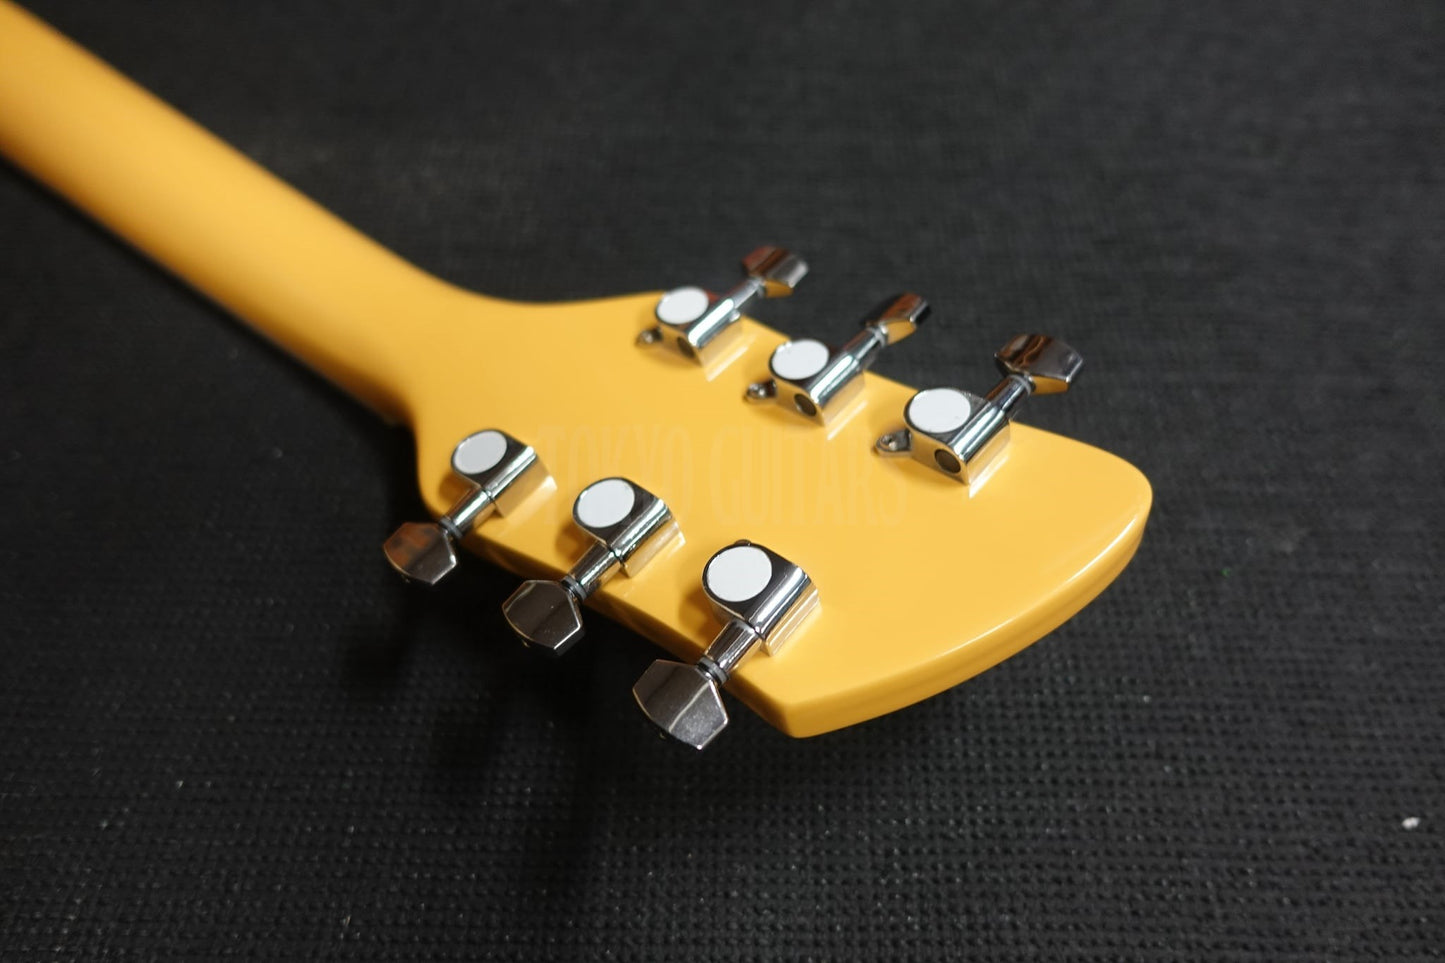 RB-5000 (Solid Yellow)